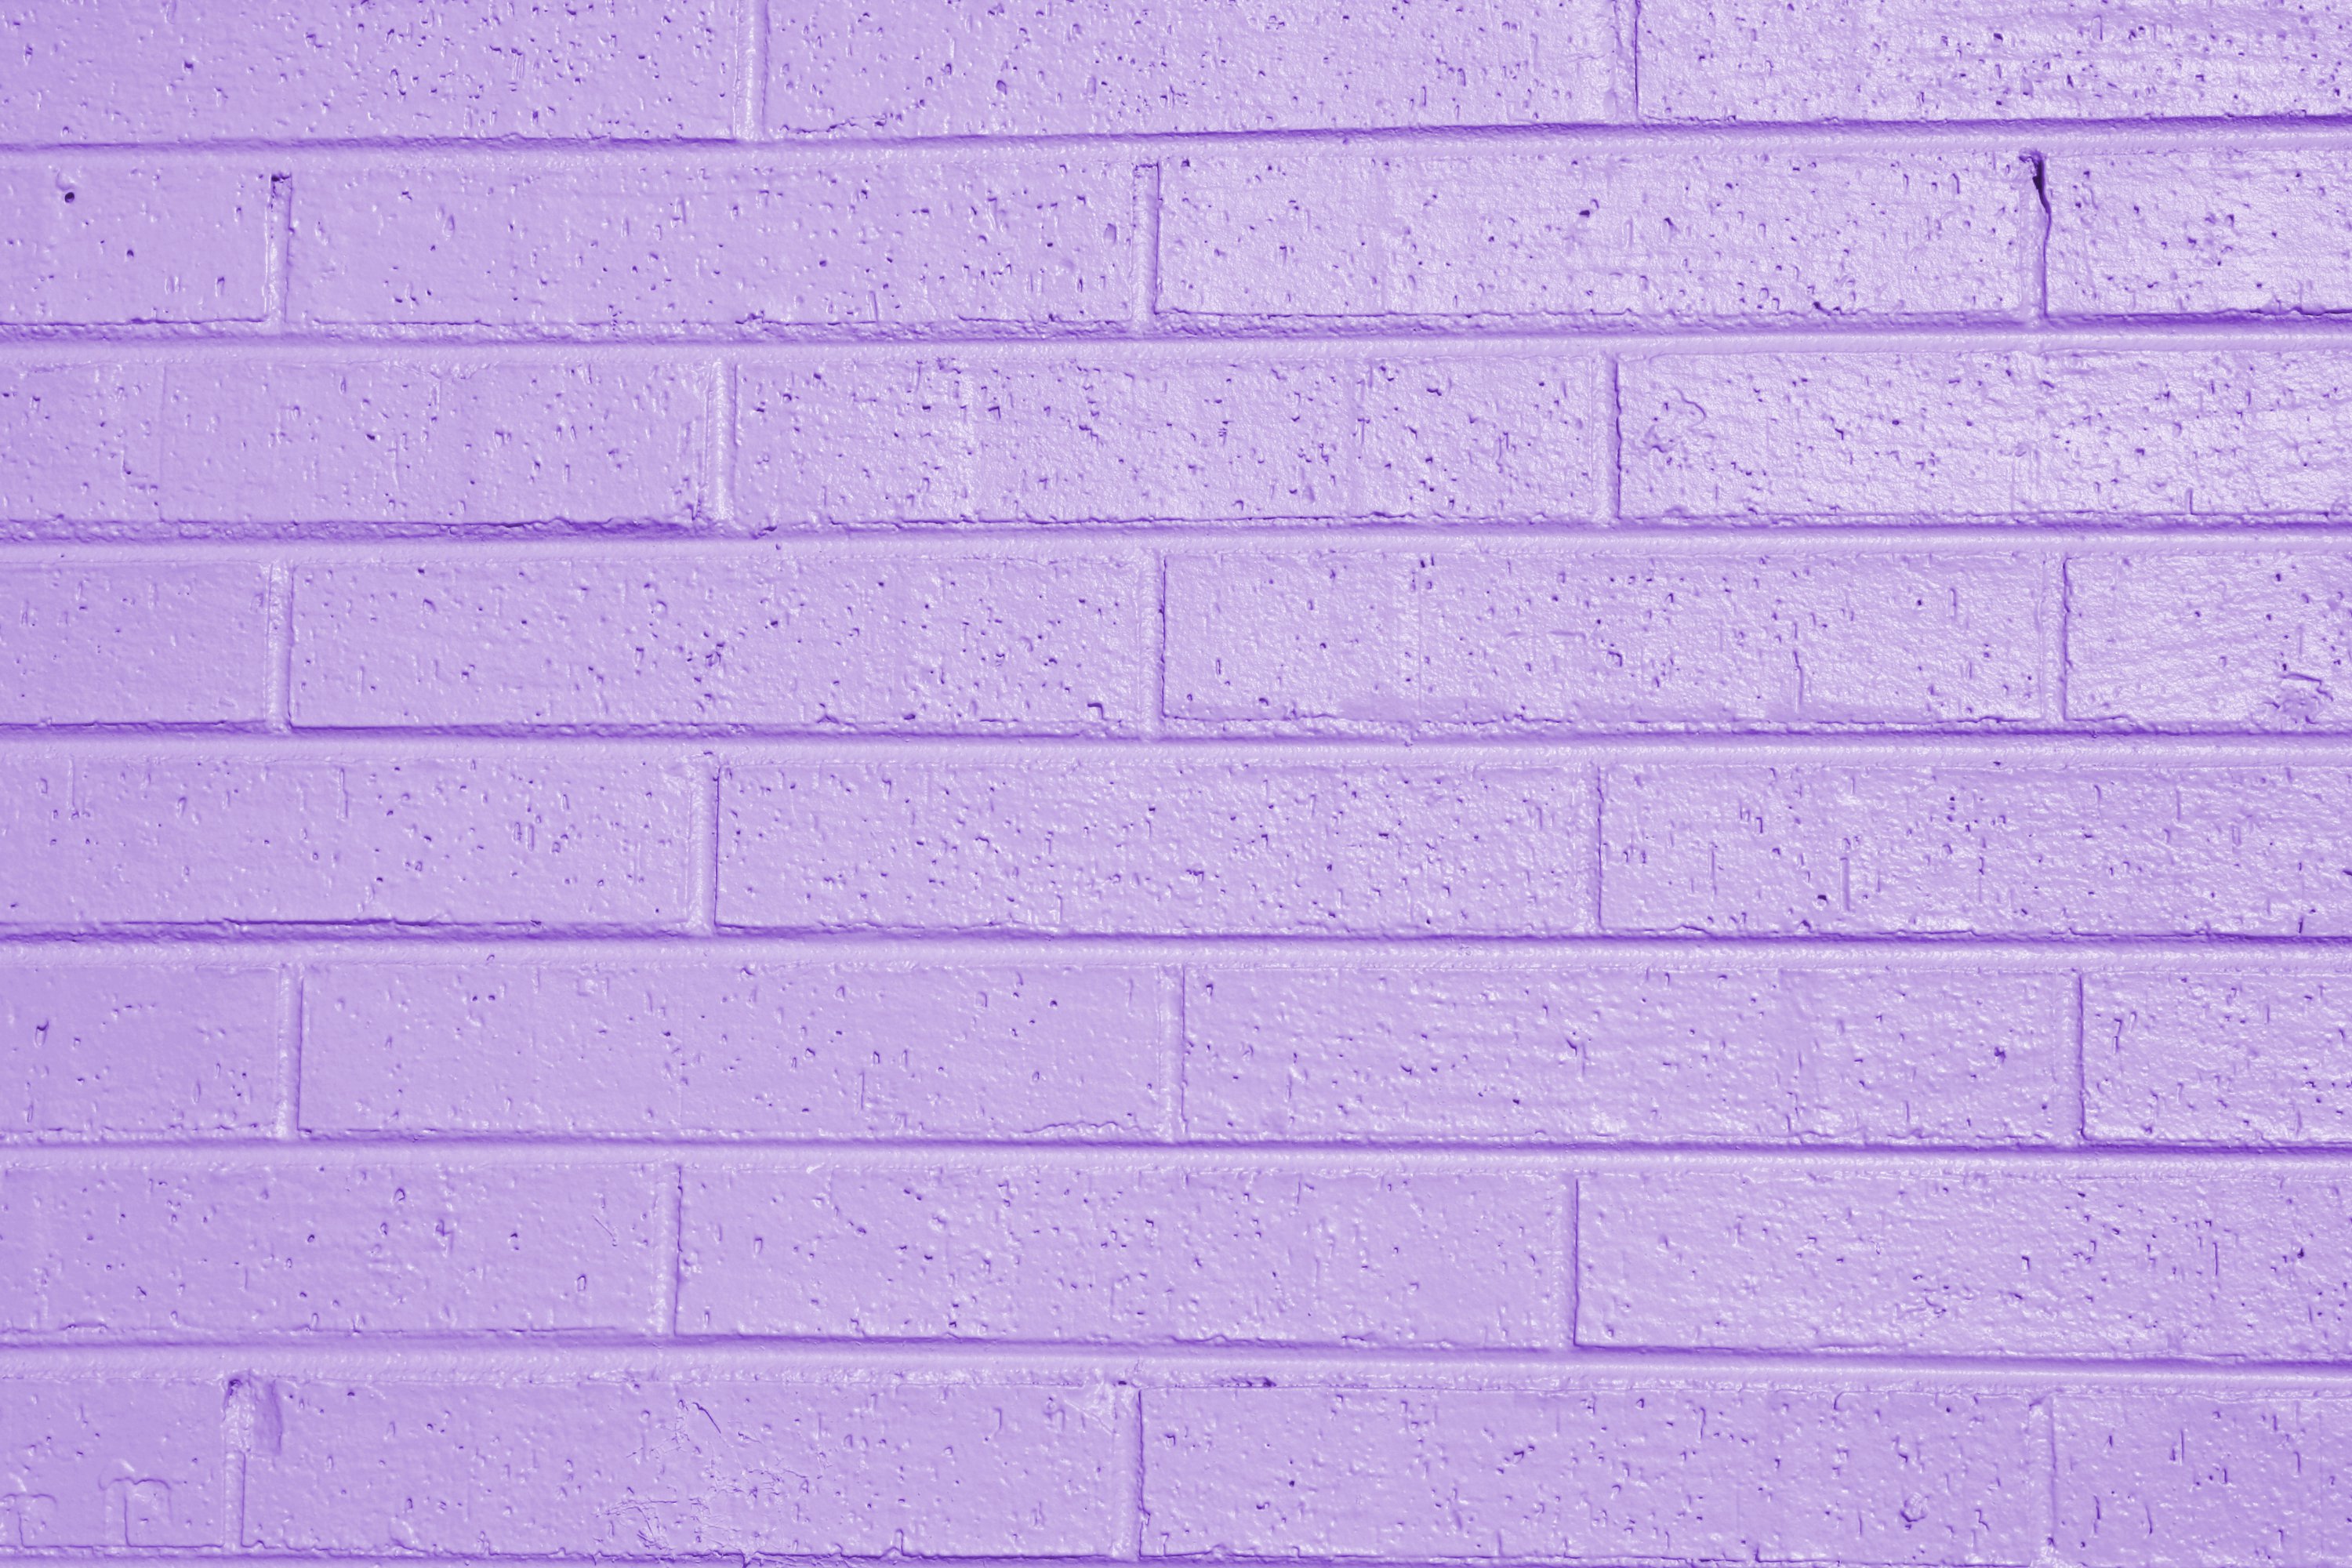 Lilac or Lavender Painted Brick Wall Texture Picture Photograph 3000x2000